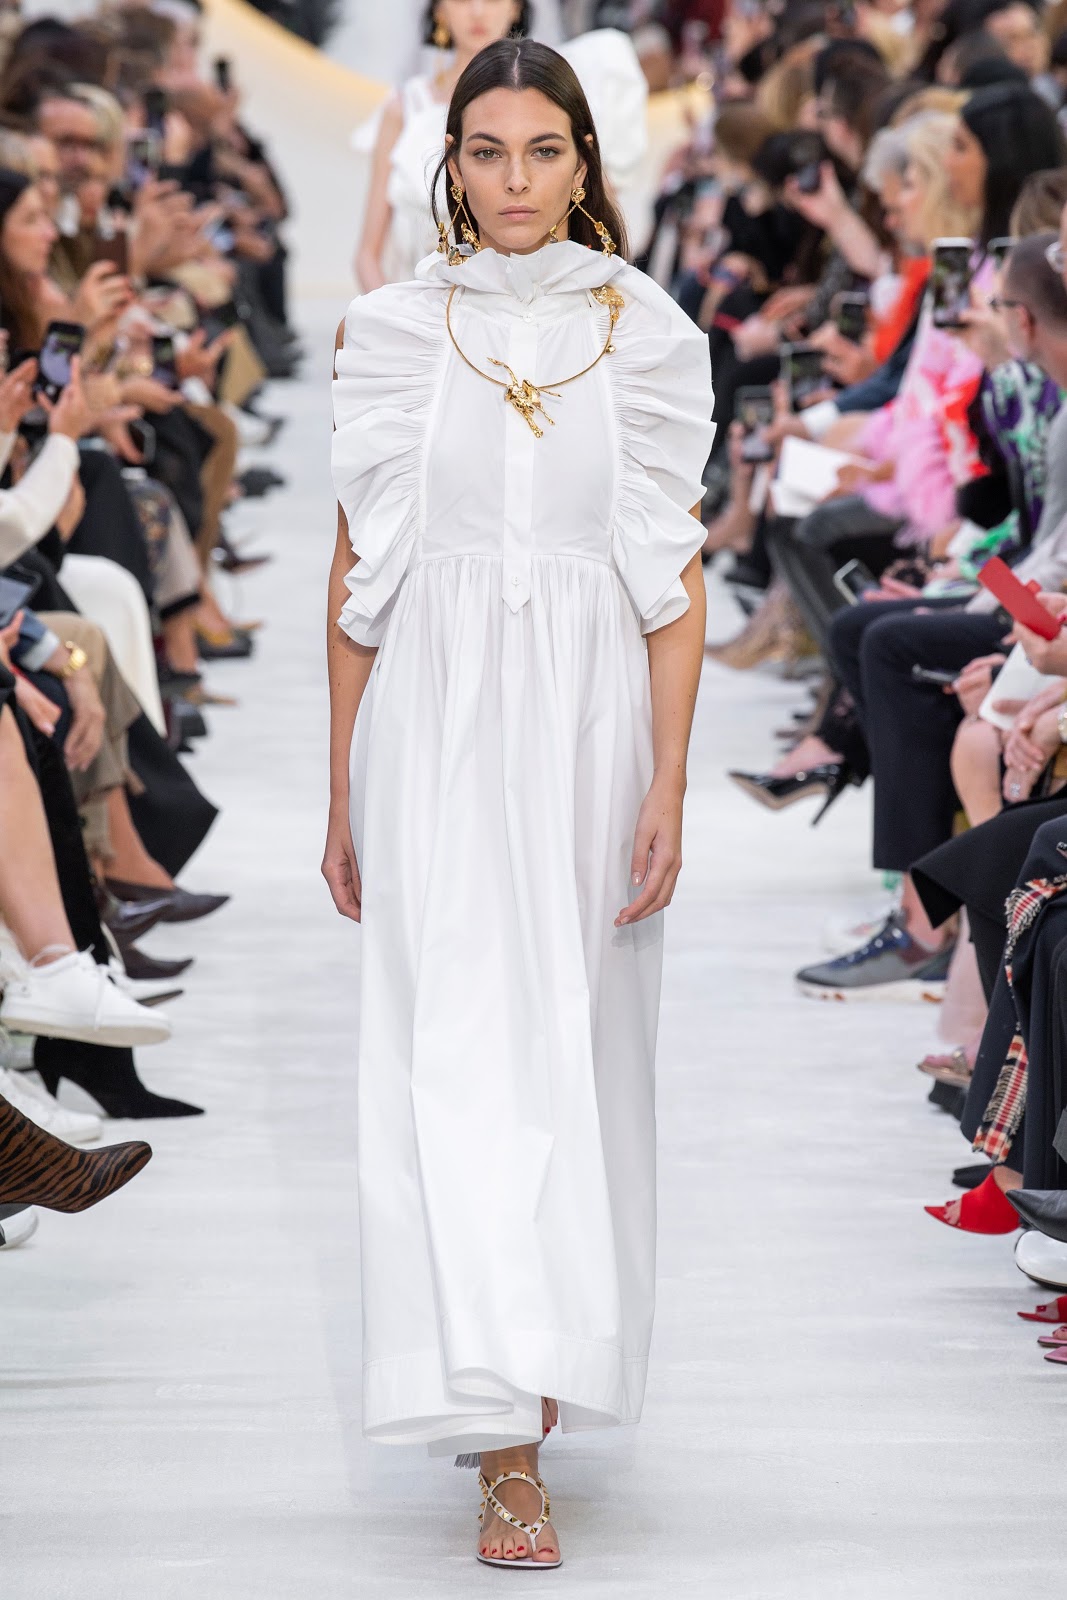 Valentino Spring-Summer 2020 {Défilé in Bianco} | Cool Chic Style Fashion